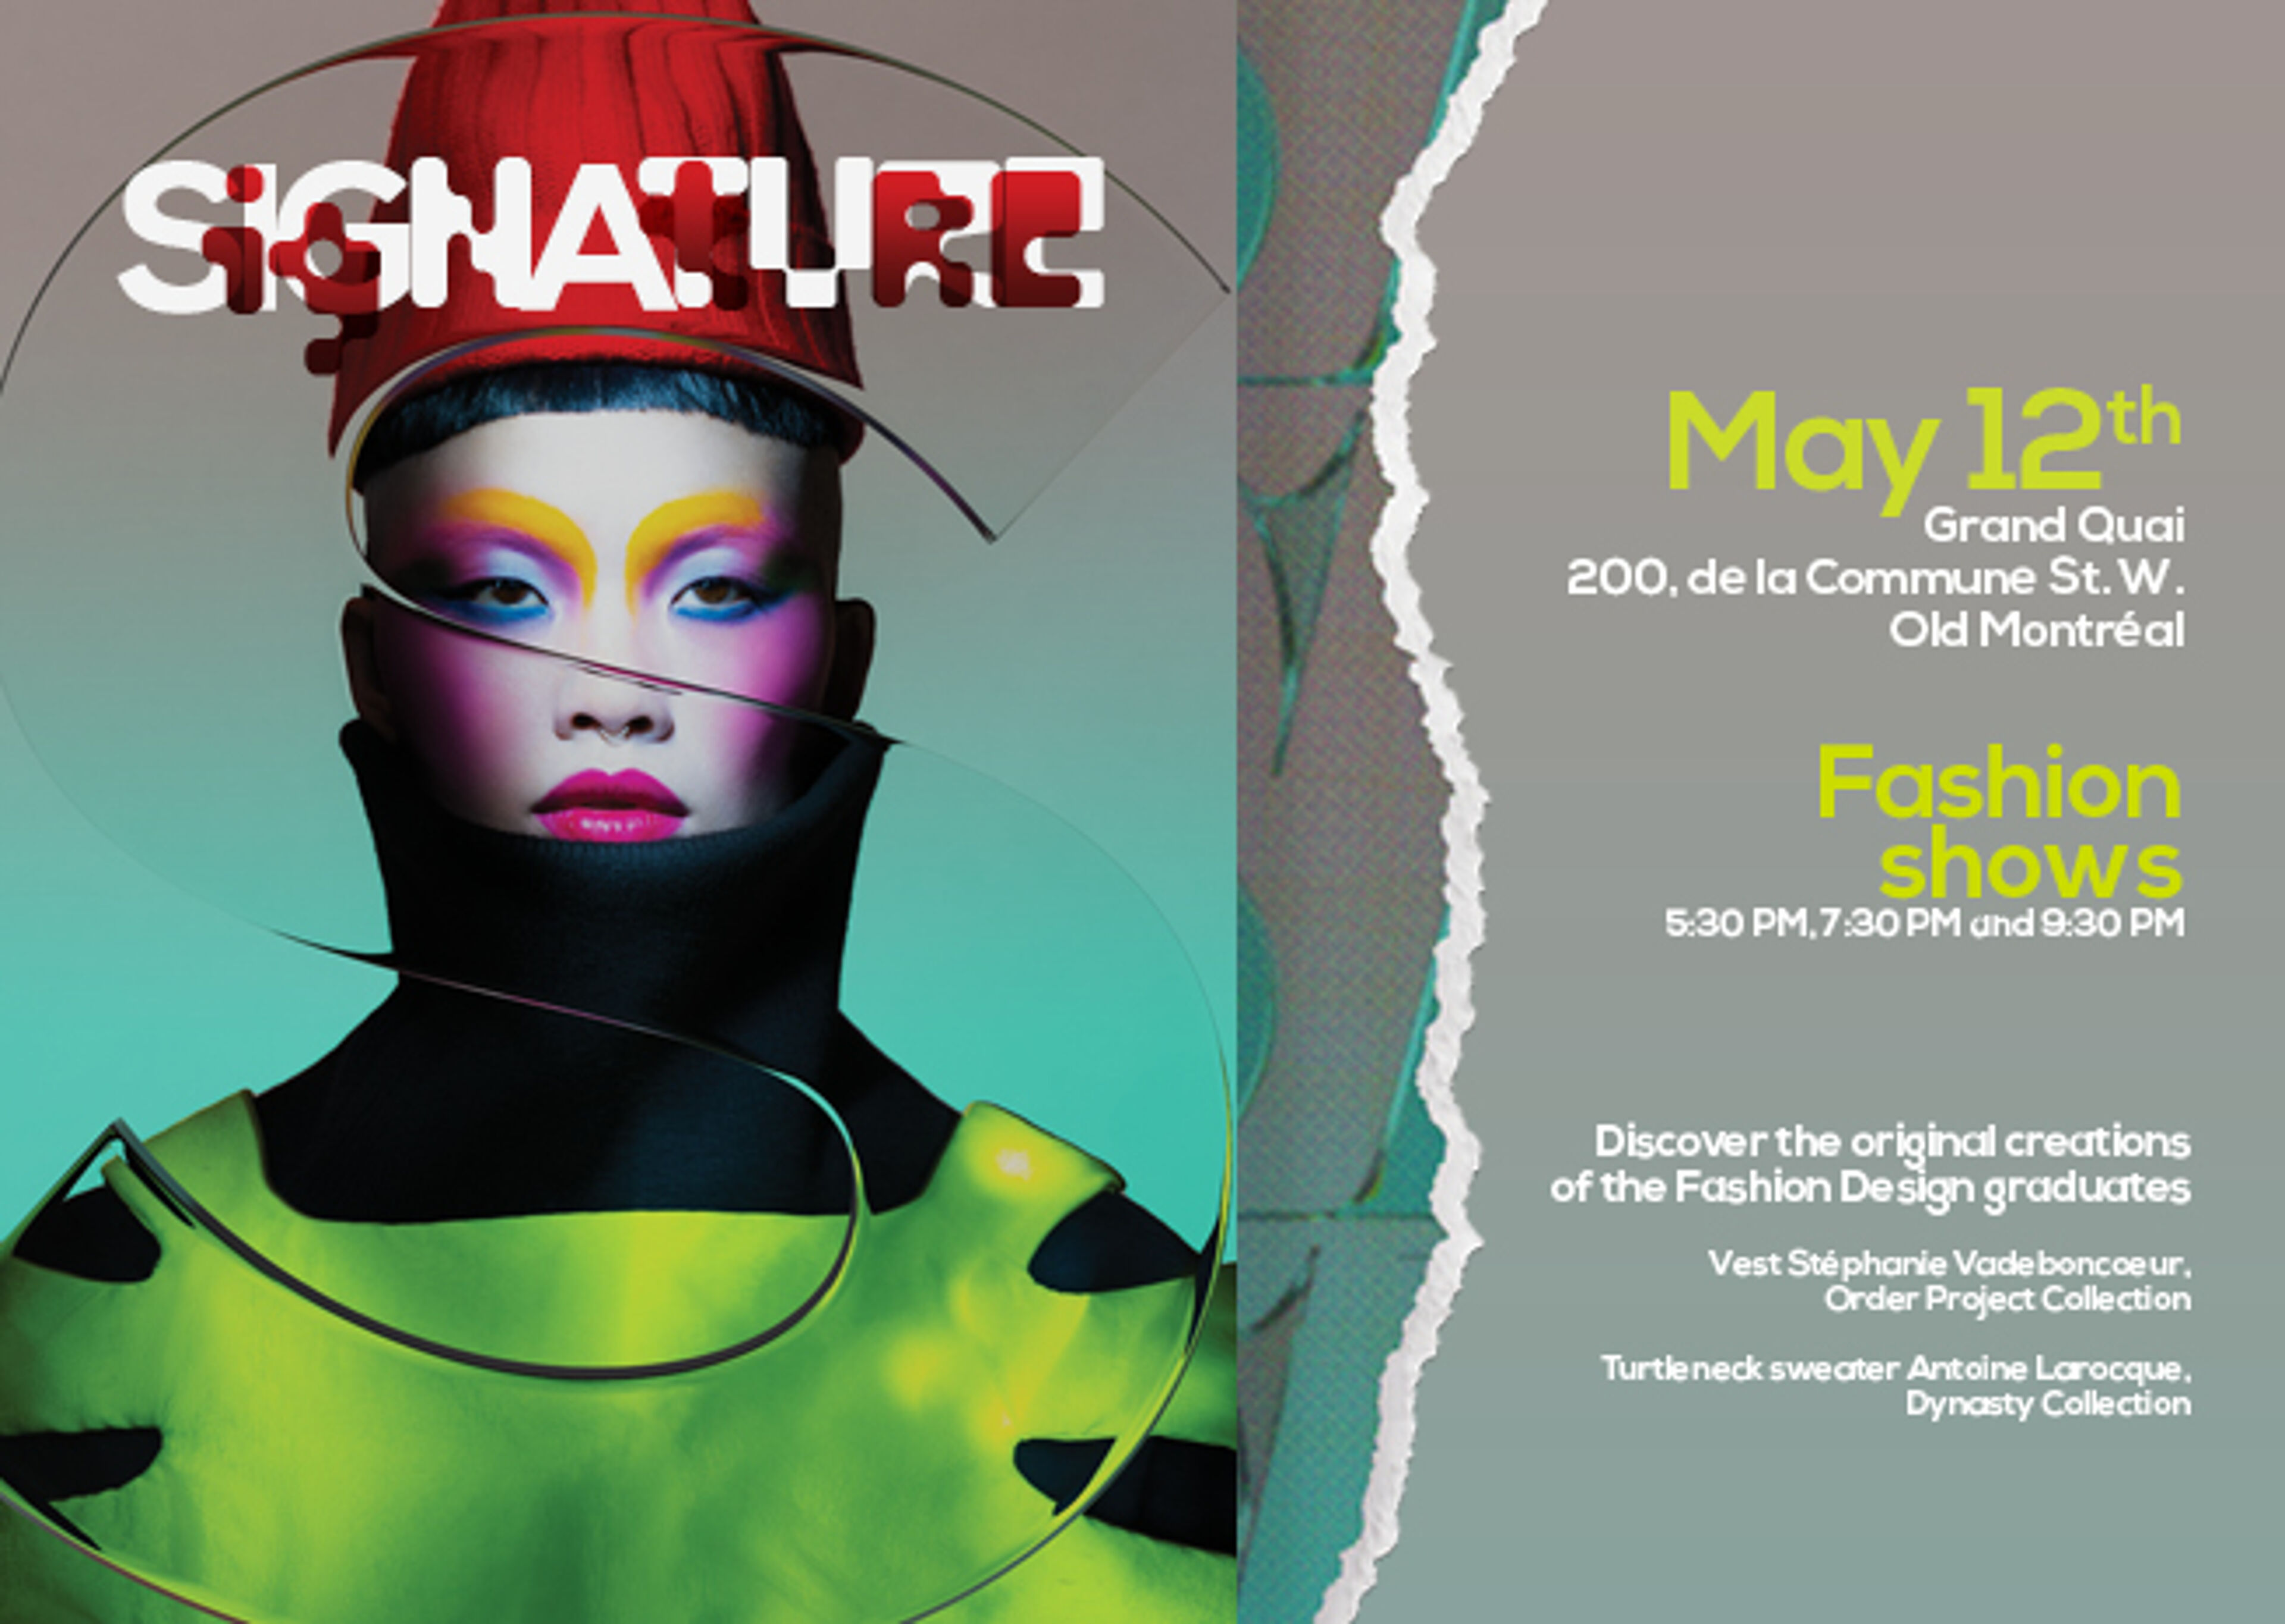 A flyer featuring a model in avant-garde makeup and attire for the "SIGNATURE" fashion shows on May 12th at Grand Quai, Old Montréal.